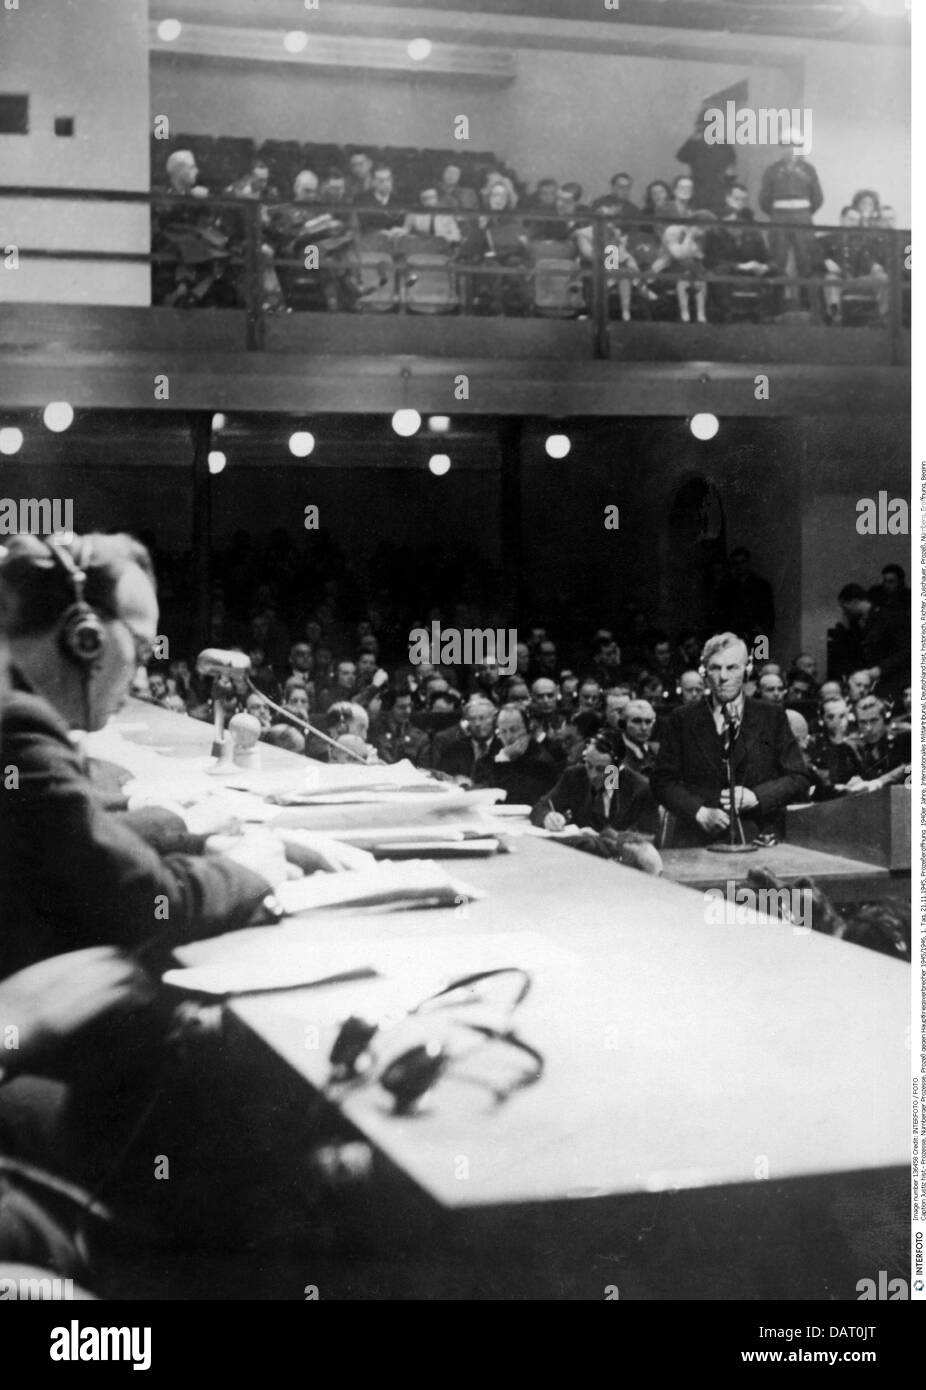 justice, justice, lawsuits, Nuremberg Trials, trial of main war criminals 1945 / 1946, 1st day, start of the litigation, 21.11.1945, historic, historical, 20th century, 1940s, 40s, international military tribunal, Germany, judge, audience, opening, starting, lawsuit, court, people, Additional-Rights-Clearences-Not Available Stock Photo